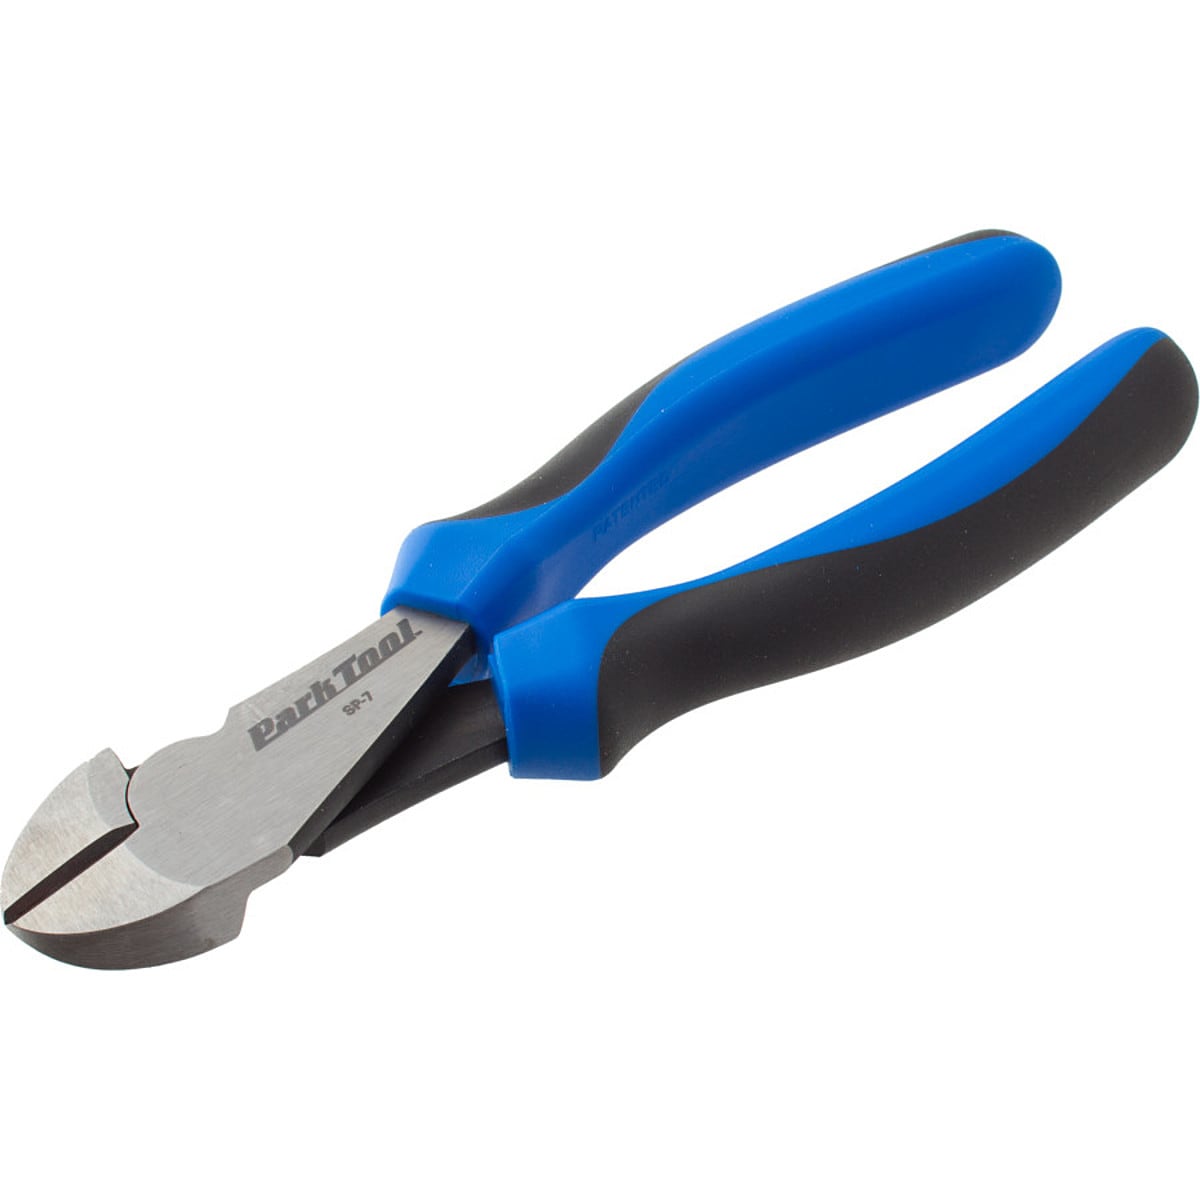 Park Tool SP-7 Side Cutter Pliers One Color, One Size